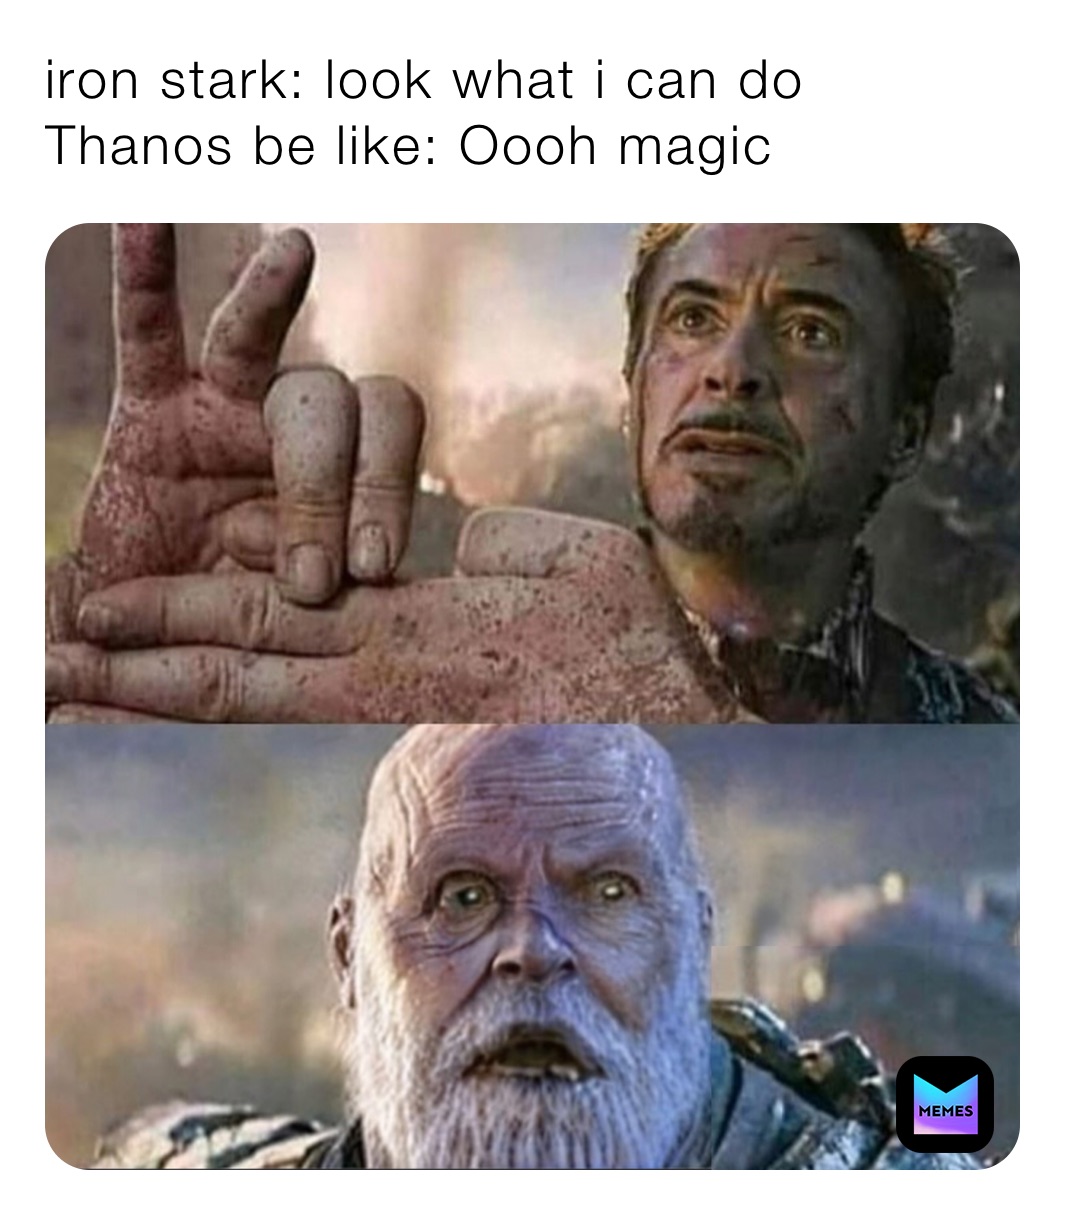 iron stark: look what i can do
Thanos be like: Oooh magic